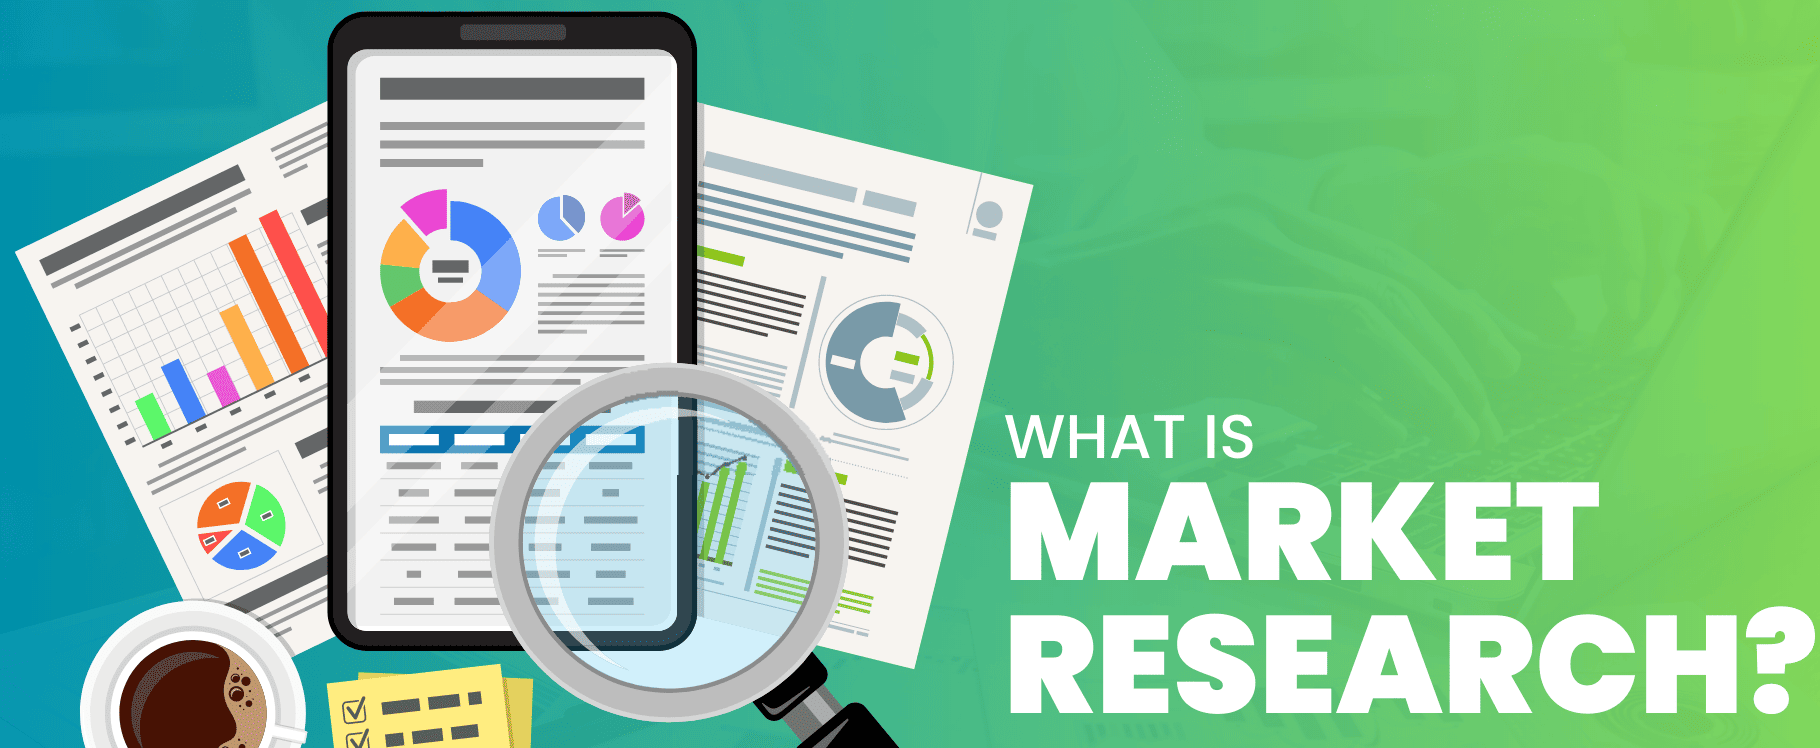 DEFINITION: What Is Market Research? Explained!